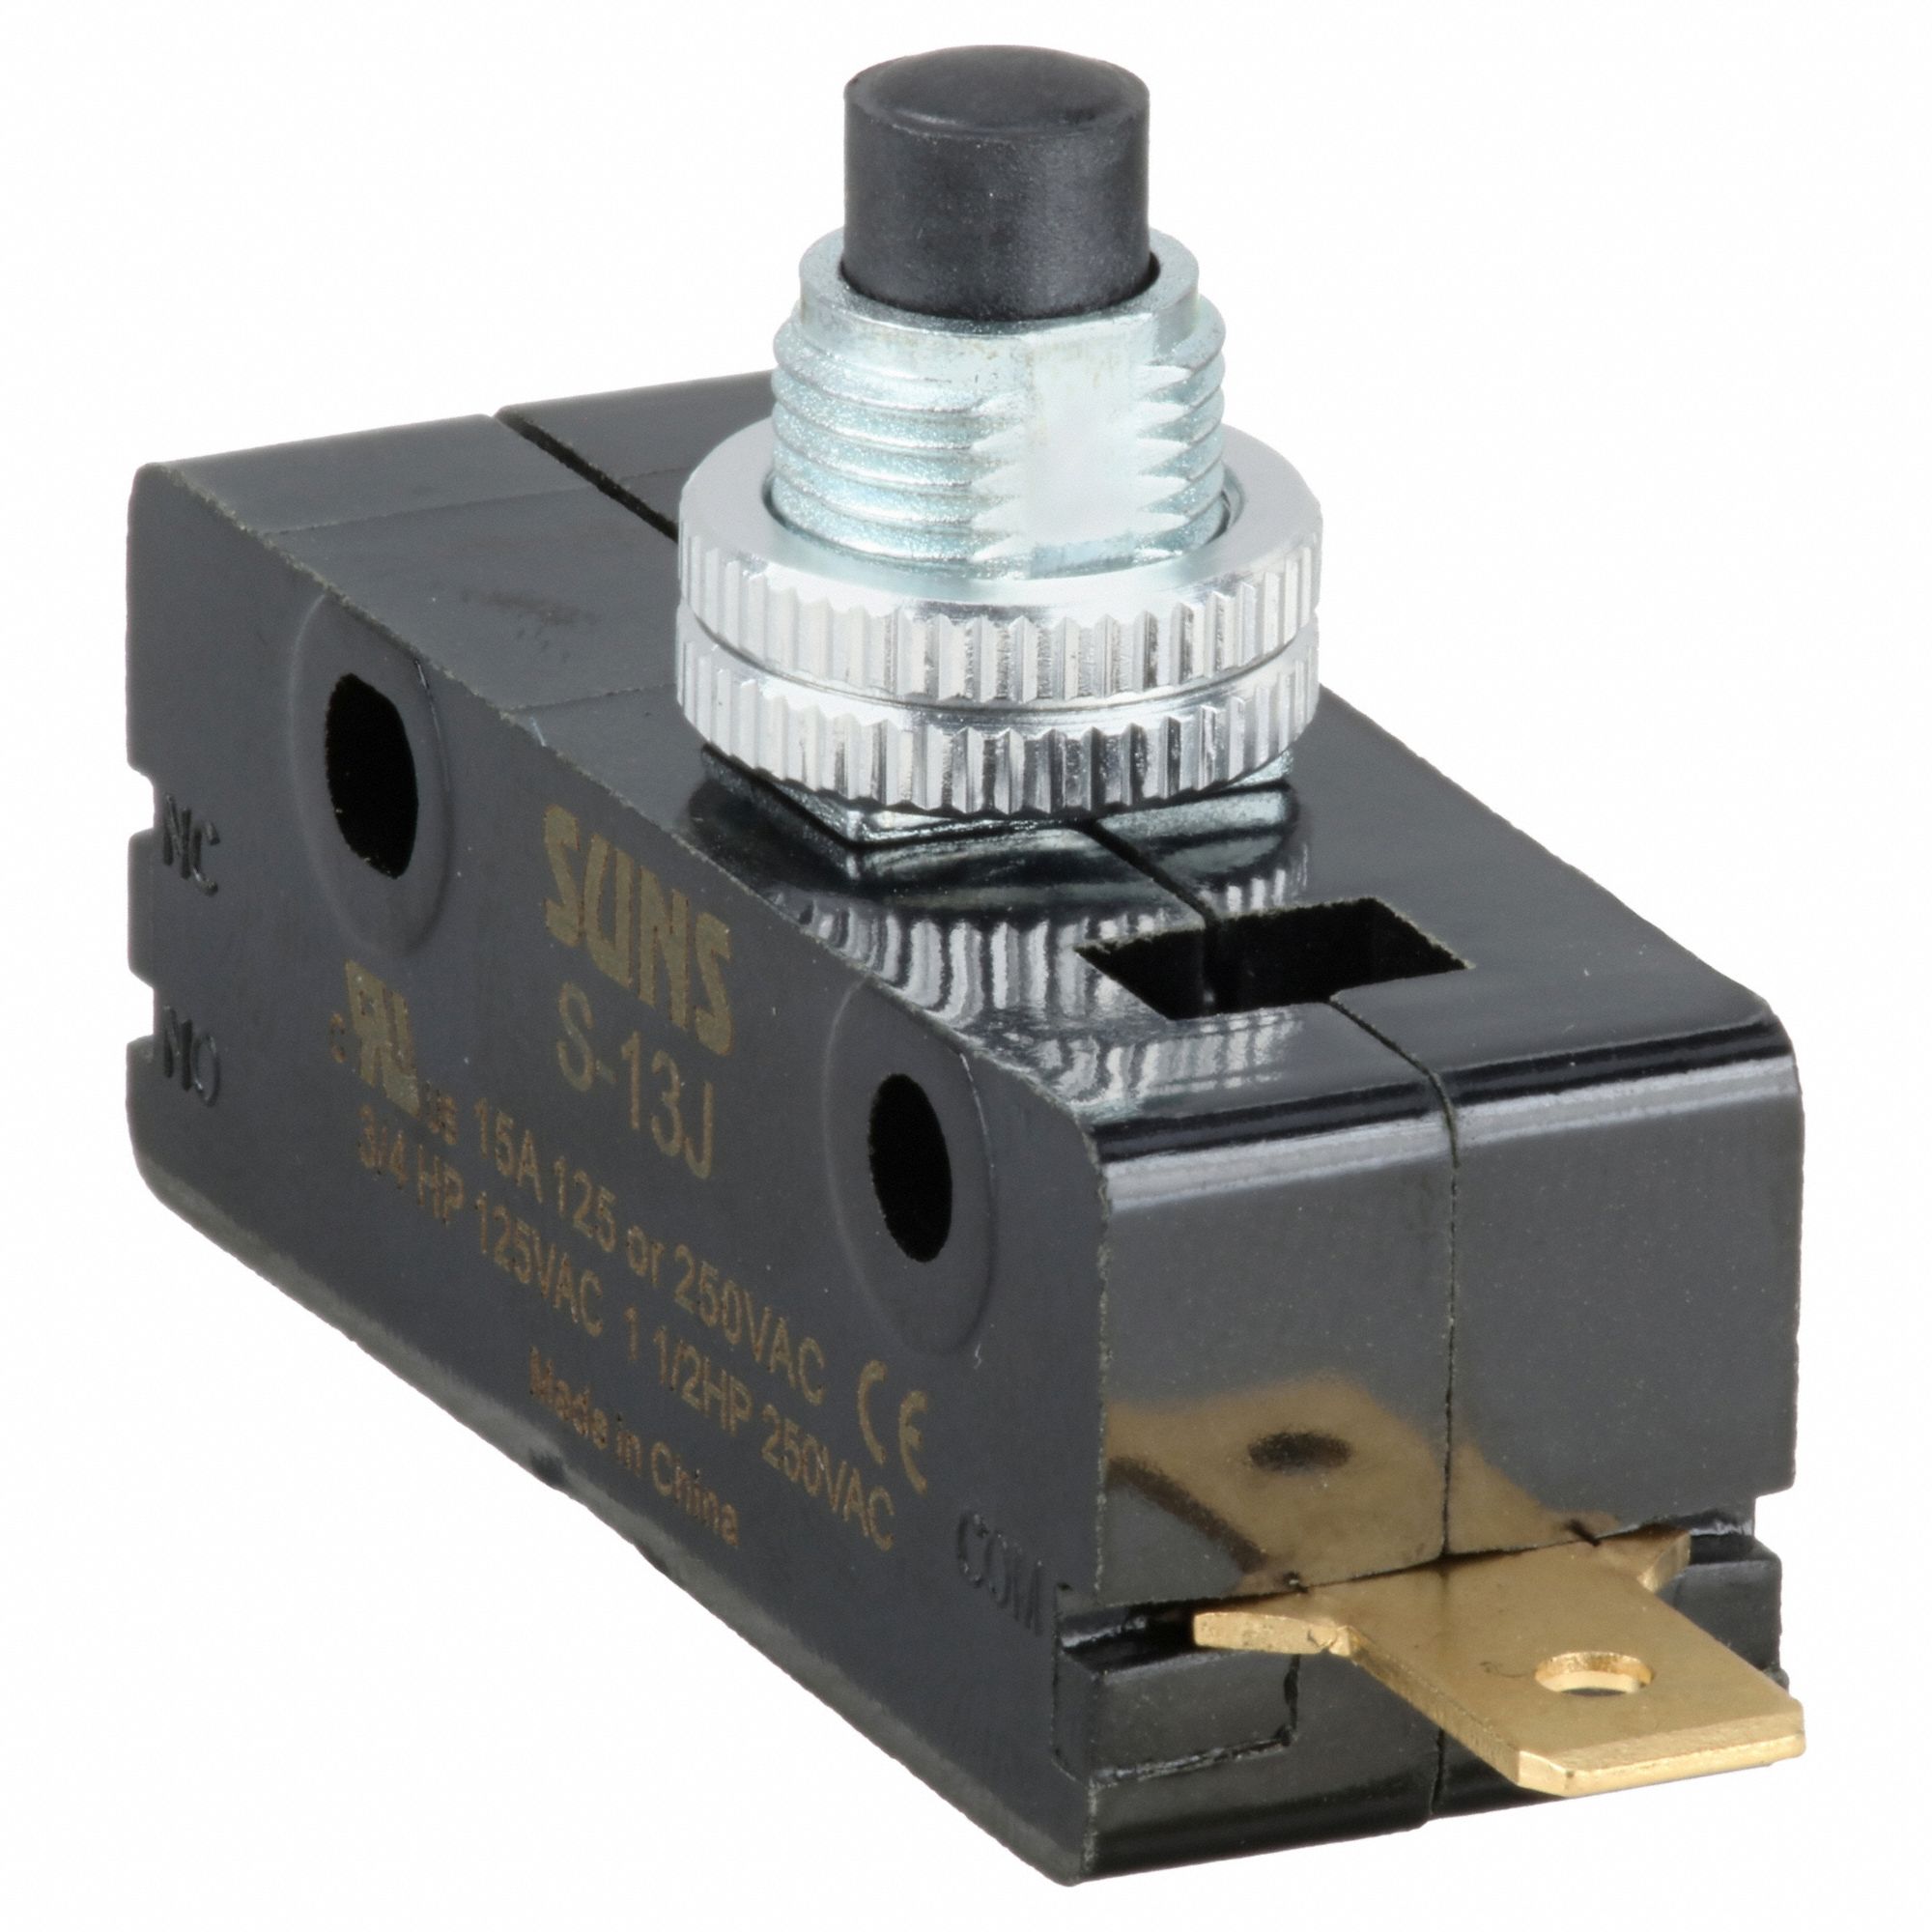 APPROVED VENDOR Industrial Snap Action Switch: 15 A @ 240 V, 0.64 in Ht -  Snap Action Switch, SPDT